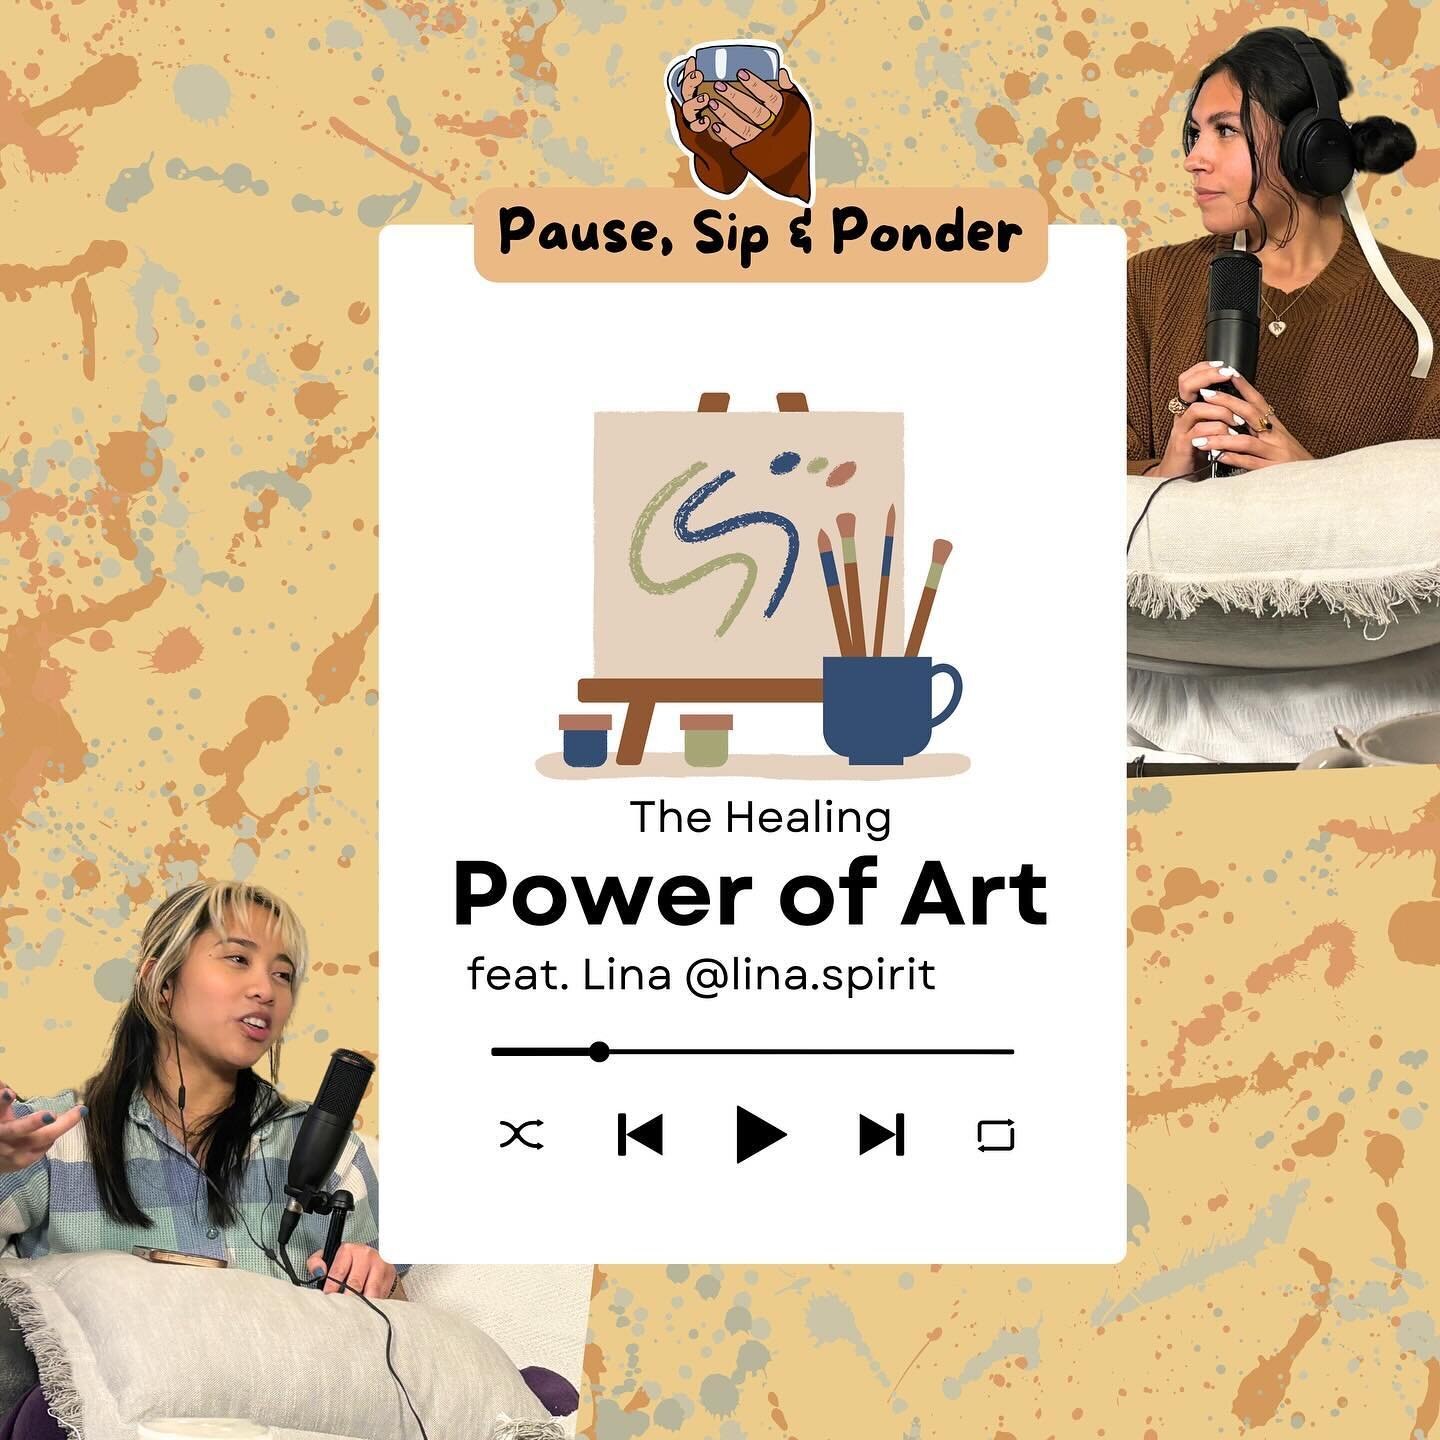 Art has a profound ability to bring healing on multiple levels, including emotional, psychological, and even physical well-being. In this episode, Angelina shares how art brought light in her darkest moments. 
How has art added value to your life?
&b